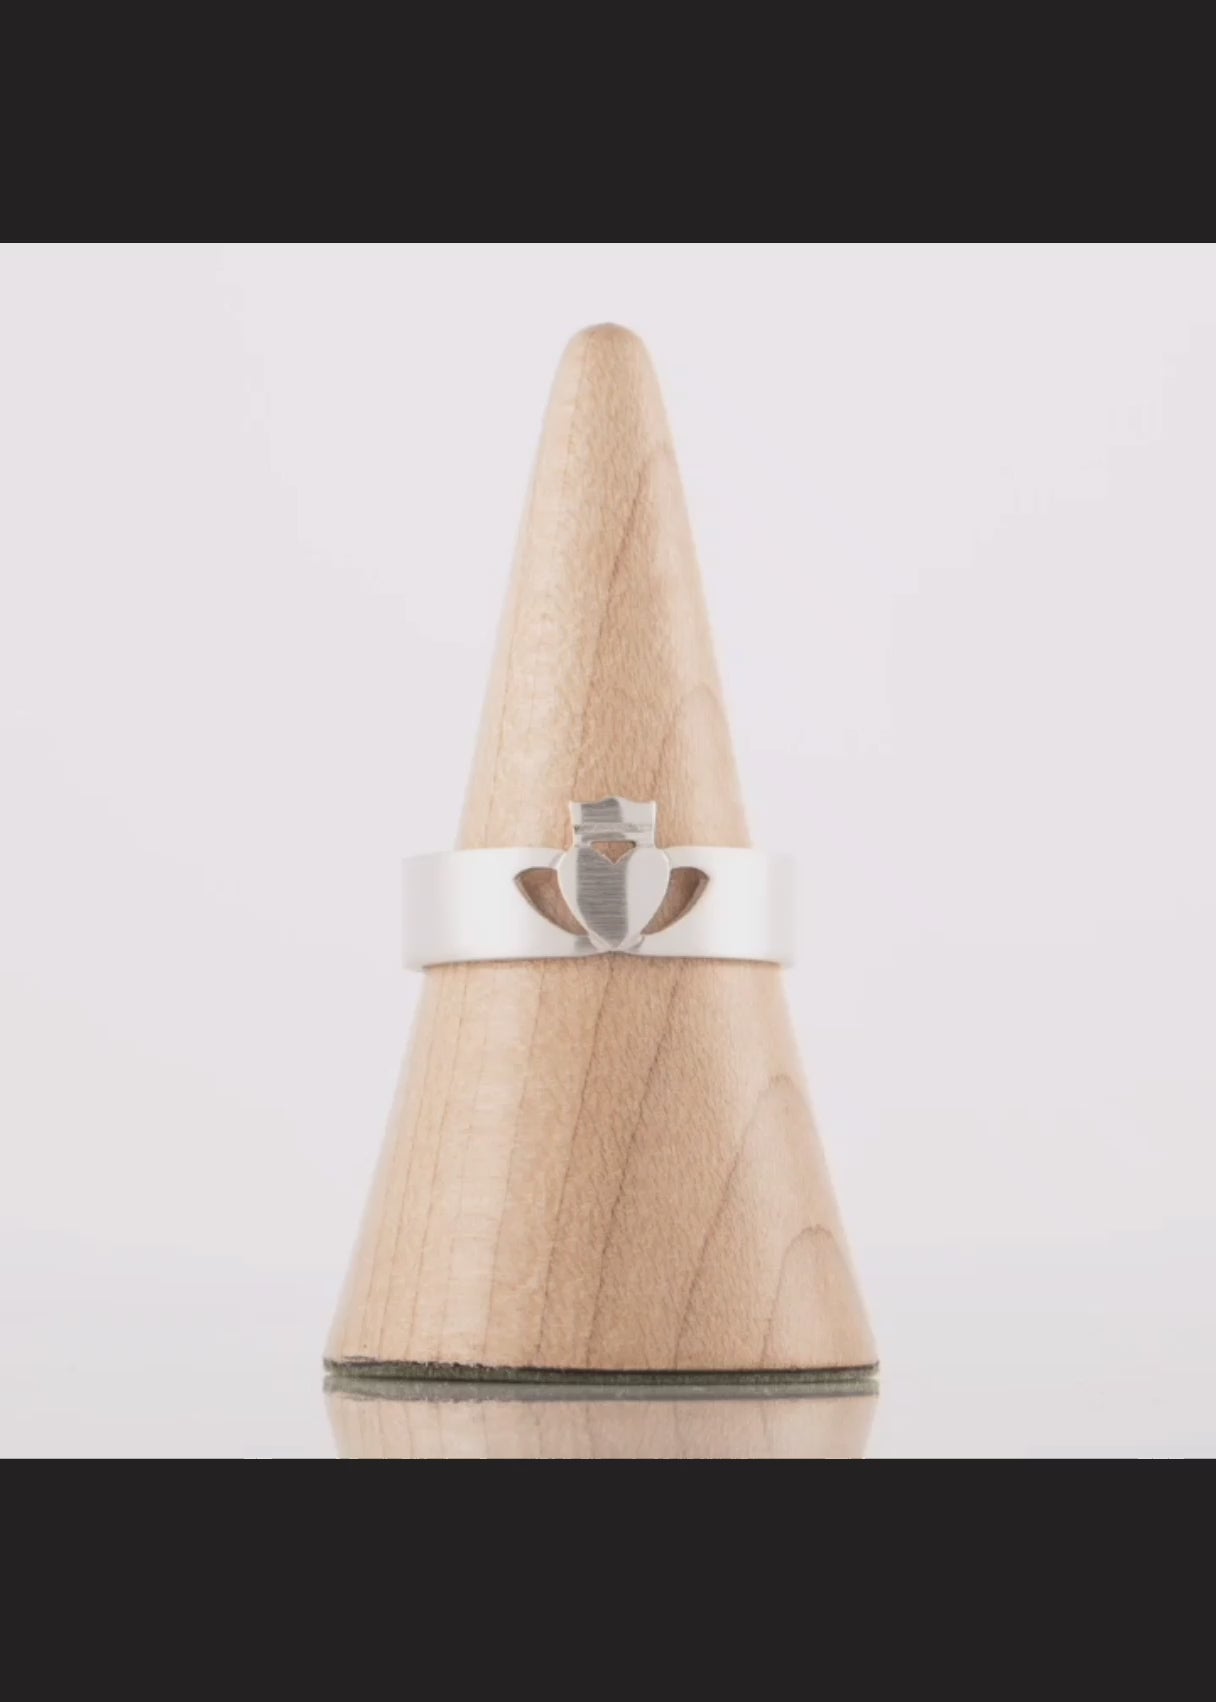 360 degree rotating video of the Men's Modern Claddagh Ring in Silver